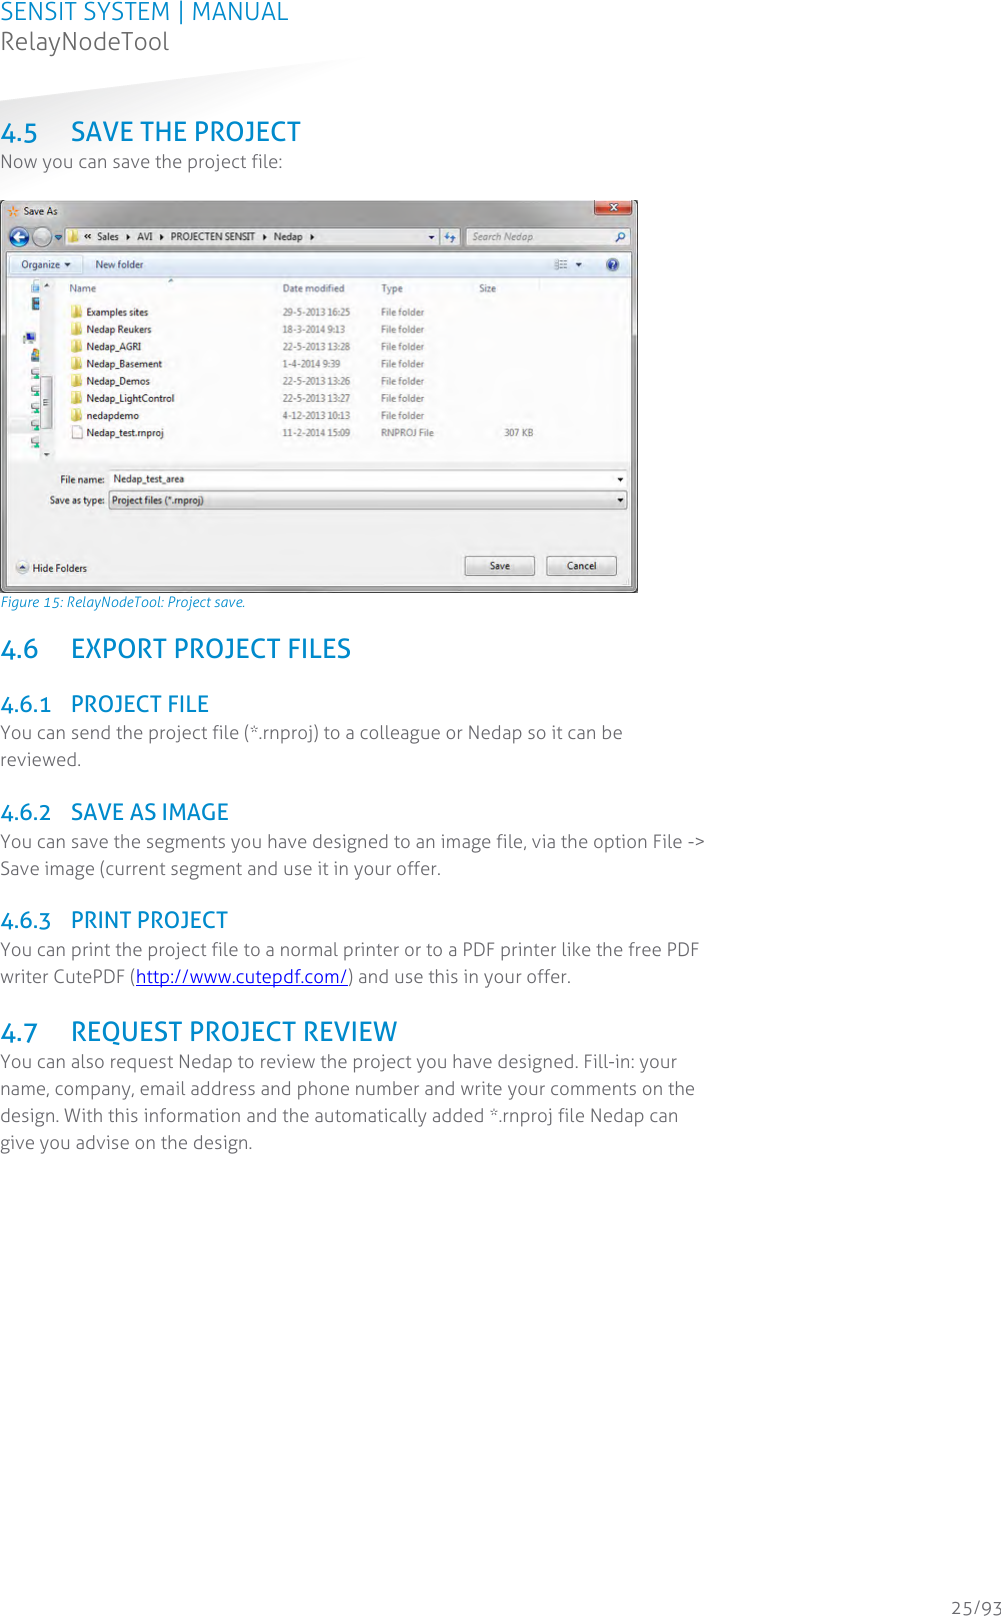 SENSIT SYSTEM | MANUAL RelayNodeTool  25/93 4.5 SAVE THE PROJECT Now you can save the project file:   Figure 15: RelayNodeTool: Project save. 4.6 EXPORT PROJECT FILES  4.6.1 PROJECT FILE You can send the project file (*.rnproj) to a colleague or Nedap so it can be reviewed.  4.6.2 SAVE AS IMAGE You can save the segments you have designed to an image file, via the option File -&gt; Save image (current segment and use it in your offer.  4.6.3 PRINT PROJECT  You can print the project file to a normal printer or to a PDF printer like the free PDF writer CutePDF (http://www.cutepdf.com/) and use this in your offer.   4.7 REQUEST PROJECT REVIEW You can also request Nedap to review the project you have designed. Fill-in: your name, company, email address and phone number and write your comments on the design. With this information and the automatically added *.rnproj file Nedap can give you advise on the design.  